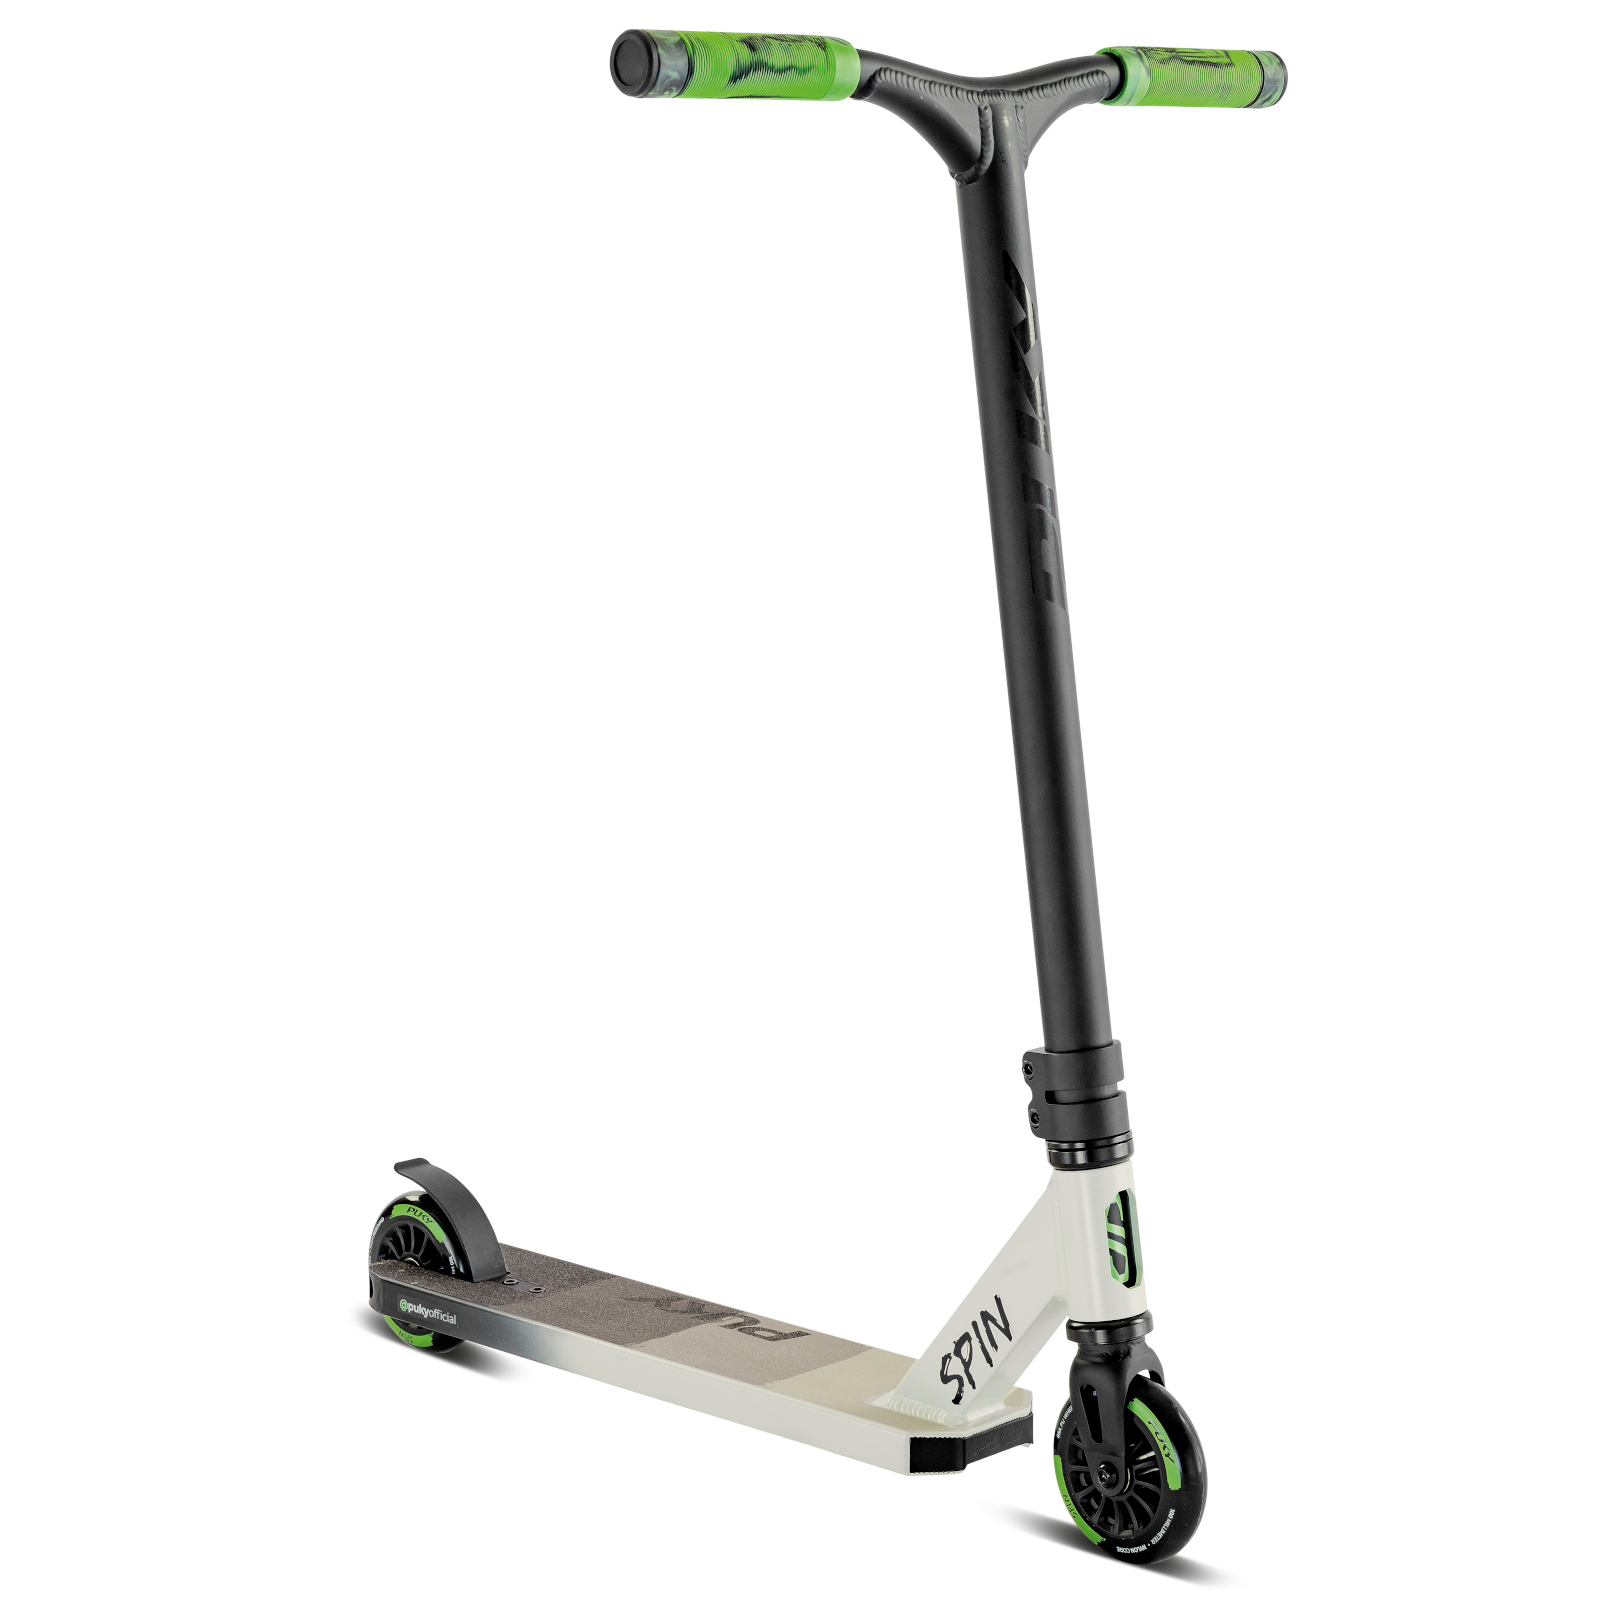 Productfoto van Puky SPIN Kinderscooter - off-white